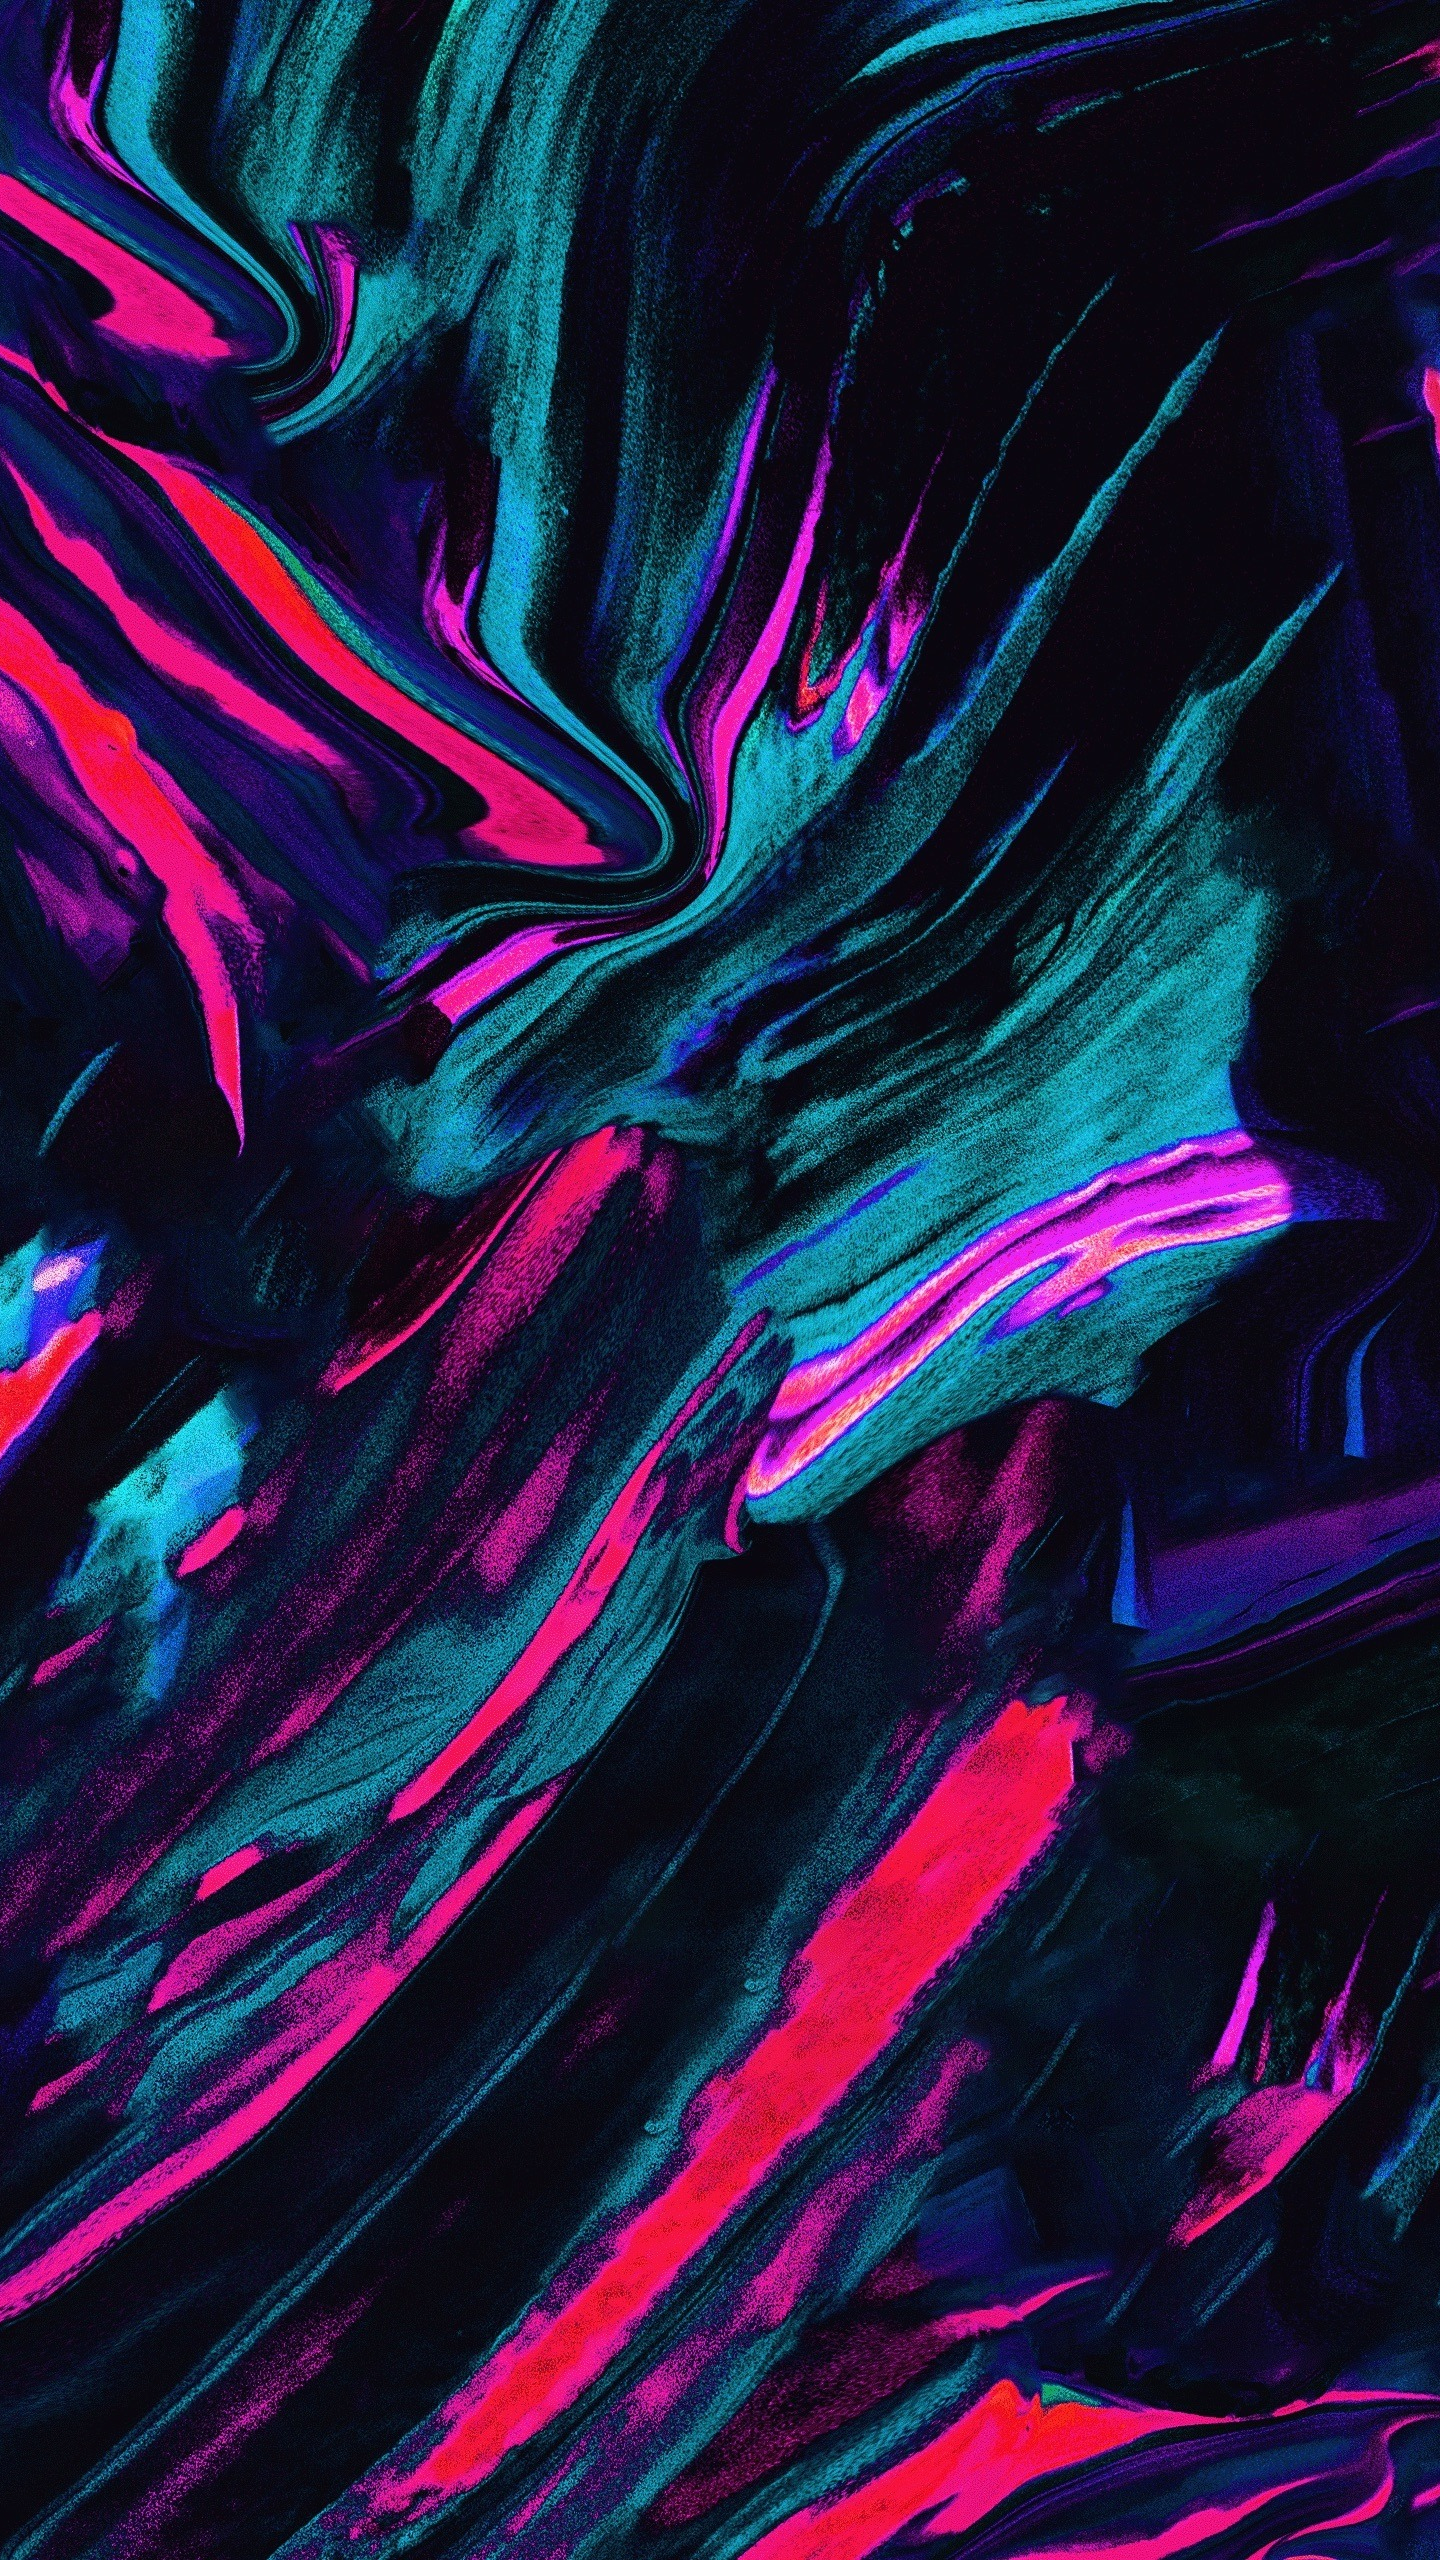 Download wallpaper 1440x2560 abstract, dark, color mixture, splashes, qhd samsung  galaxy s6, s7, edge, note, lg g4, 1440x2560 hd background, 1915